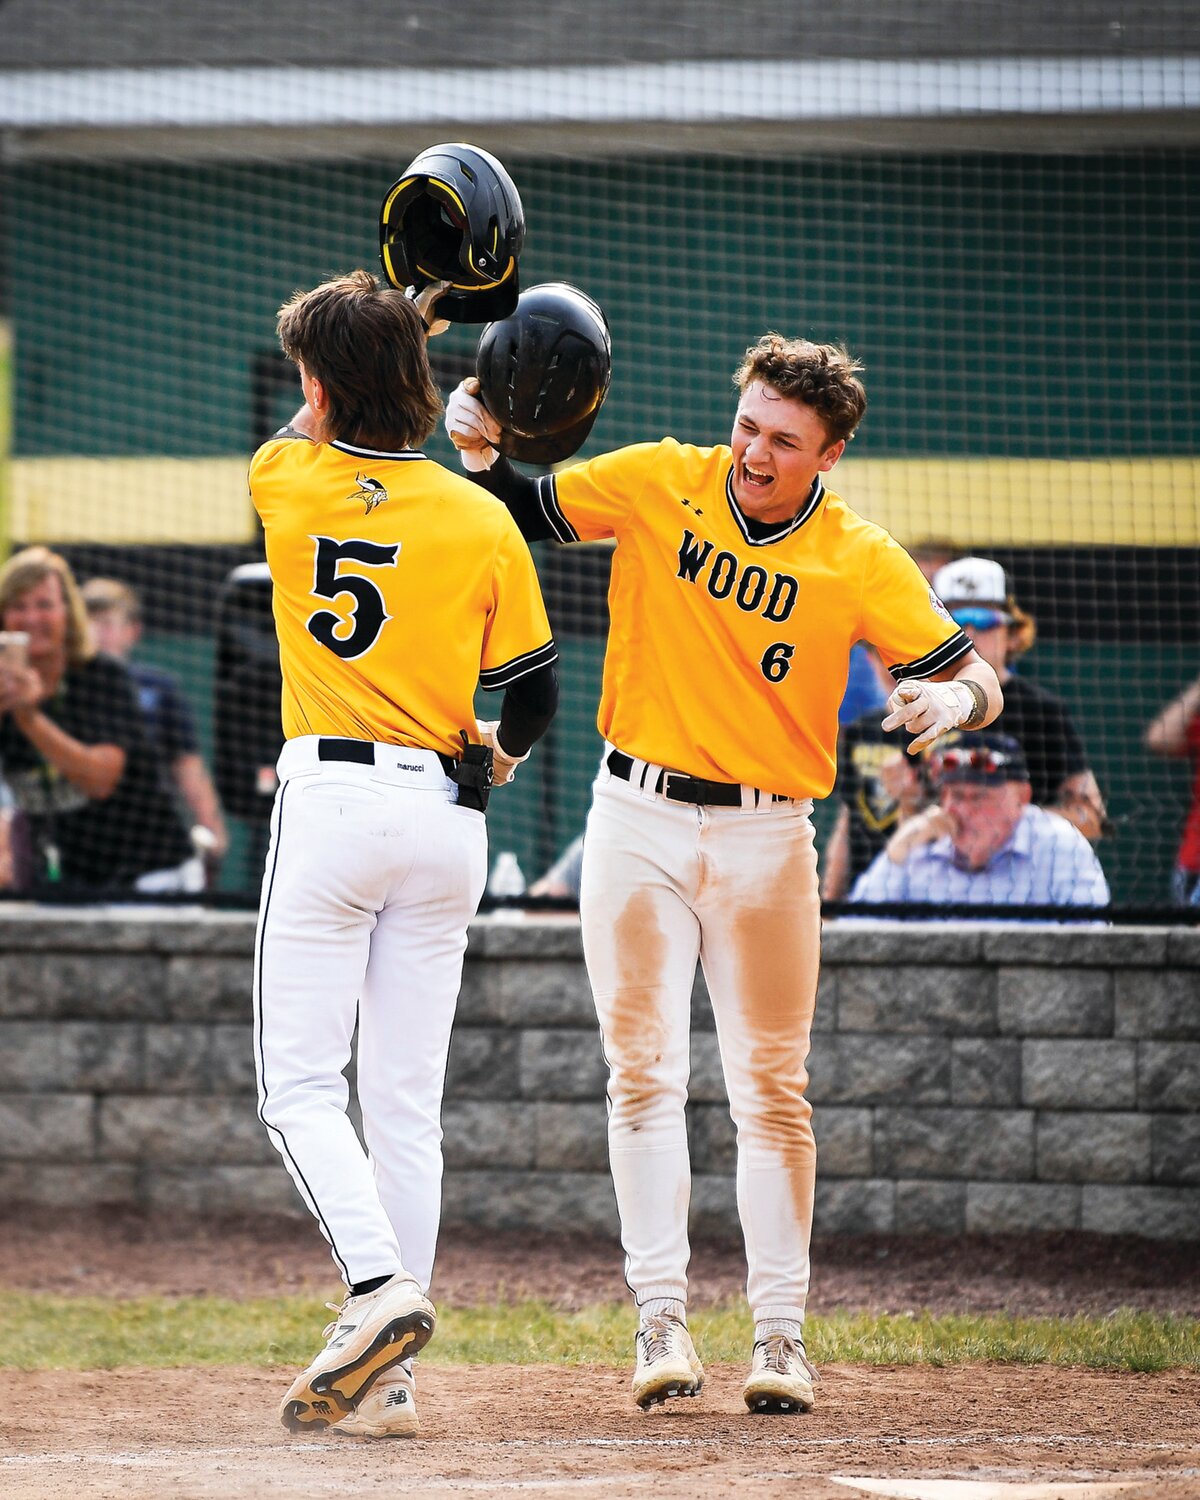 Archbishop Wood’s Braden Kelly is greeted at home after his home run in the third inning by Sean Burke.